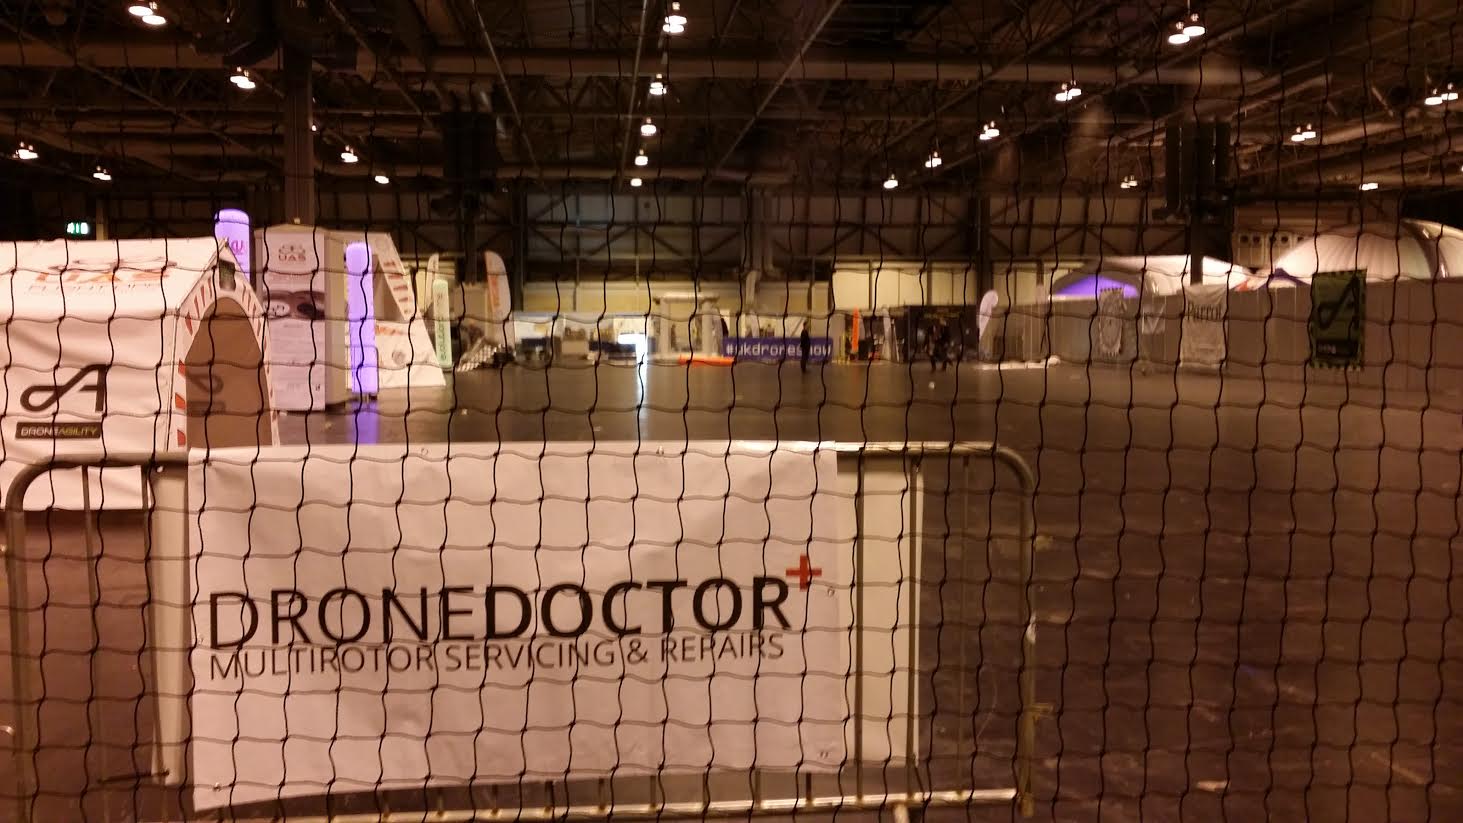 Drone Doctor banner in the main flying arena at the UK Drone Show 2015 NEC Birmingham